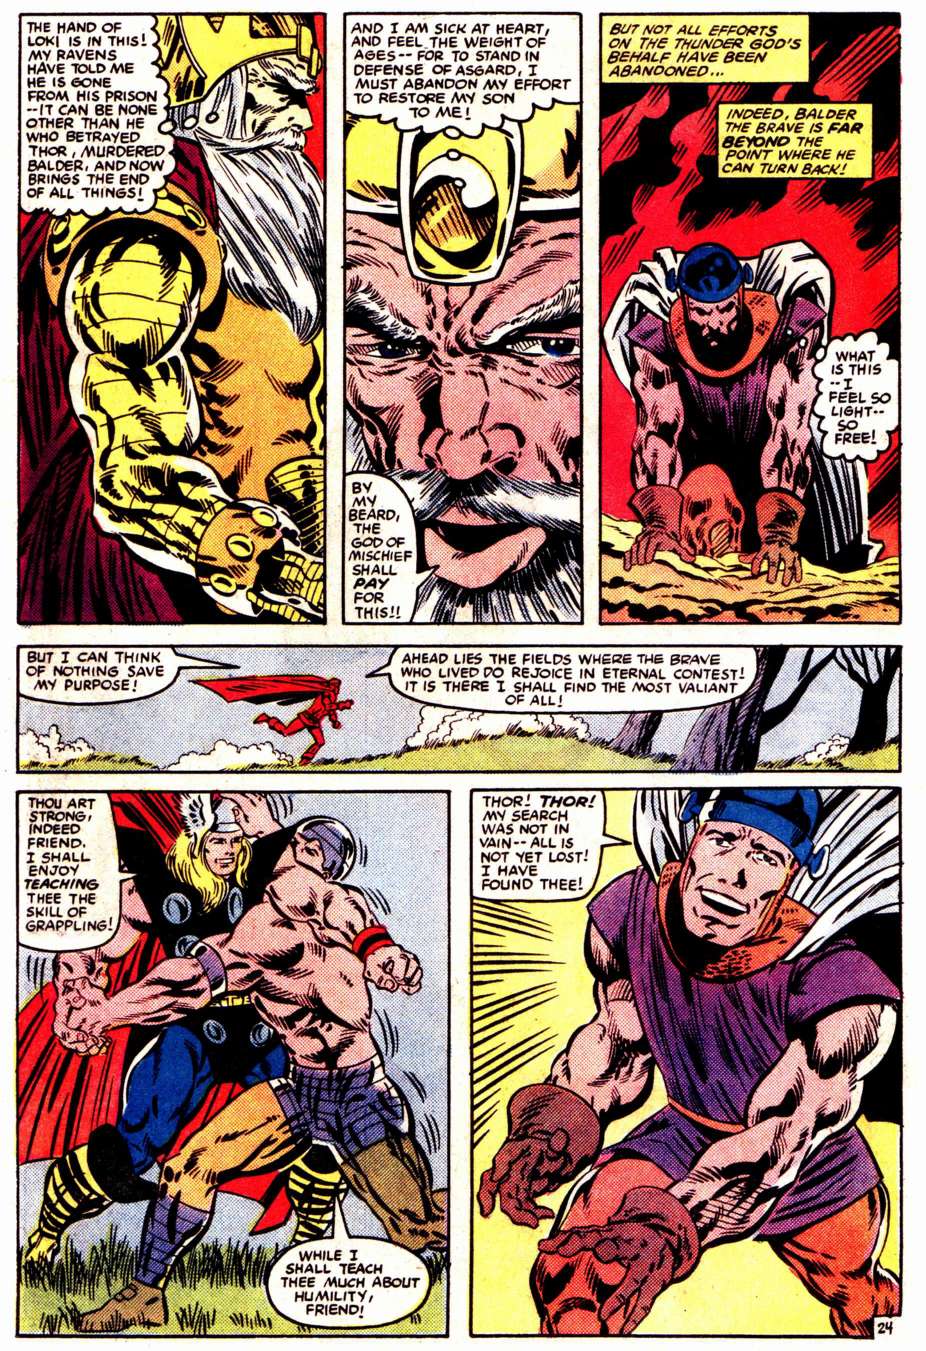 What If? (1977) issue 47 - Loki had found The hammer of Thor - Page 25